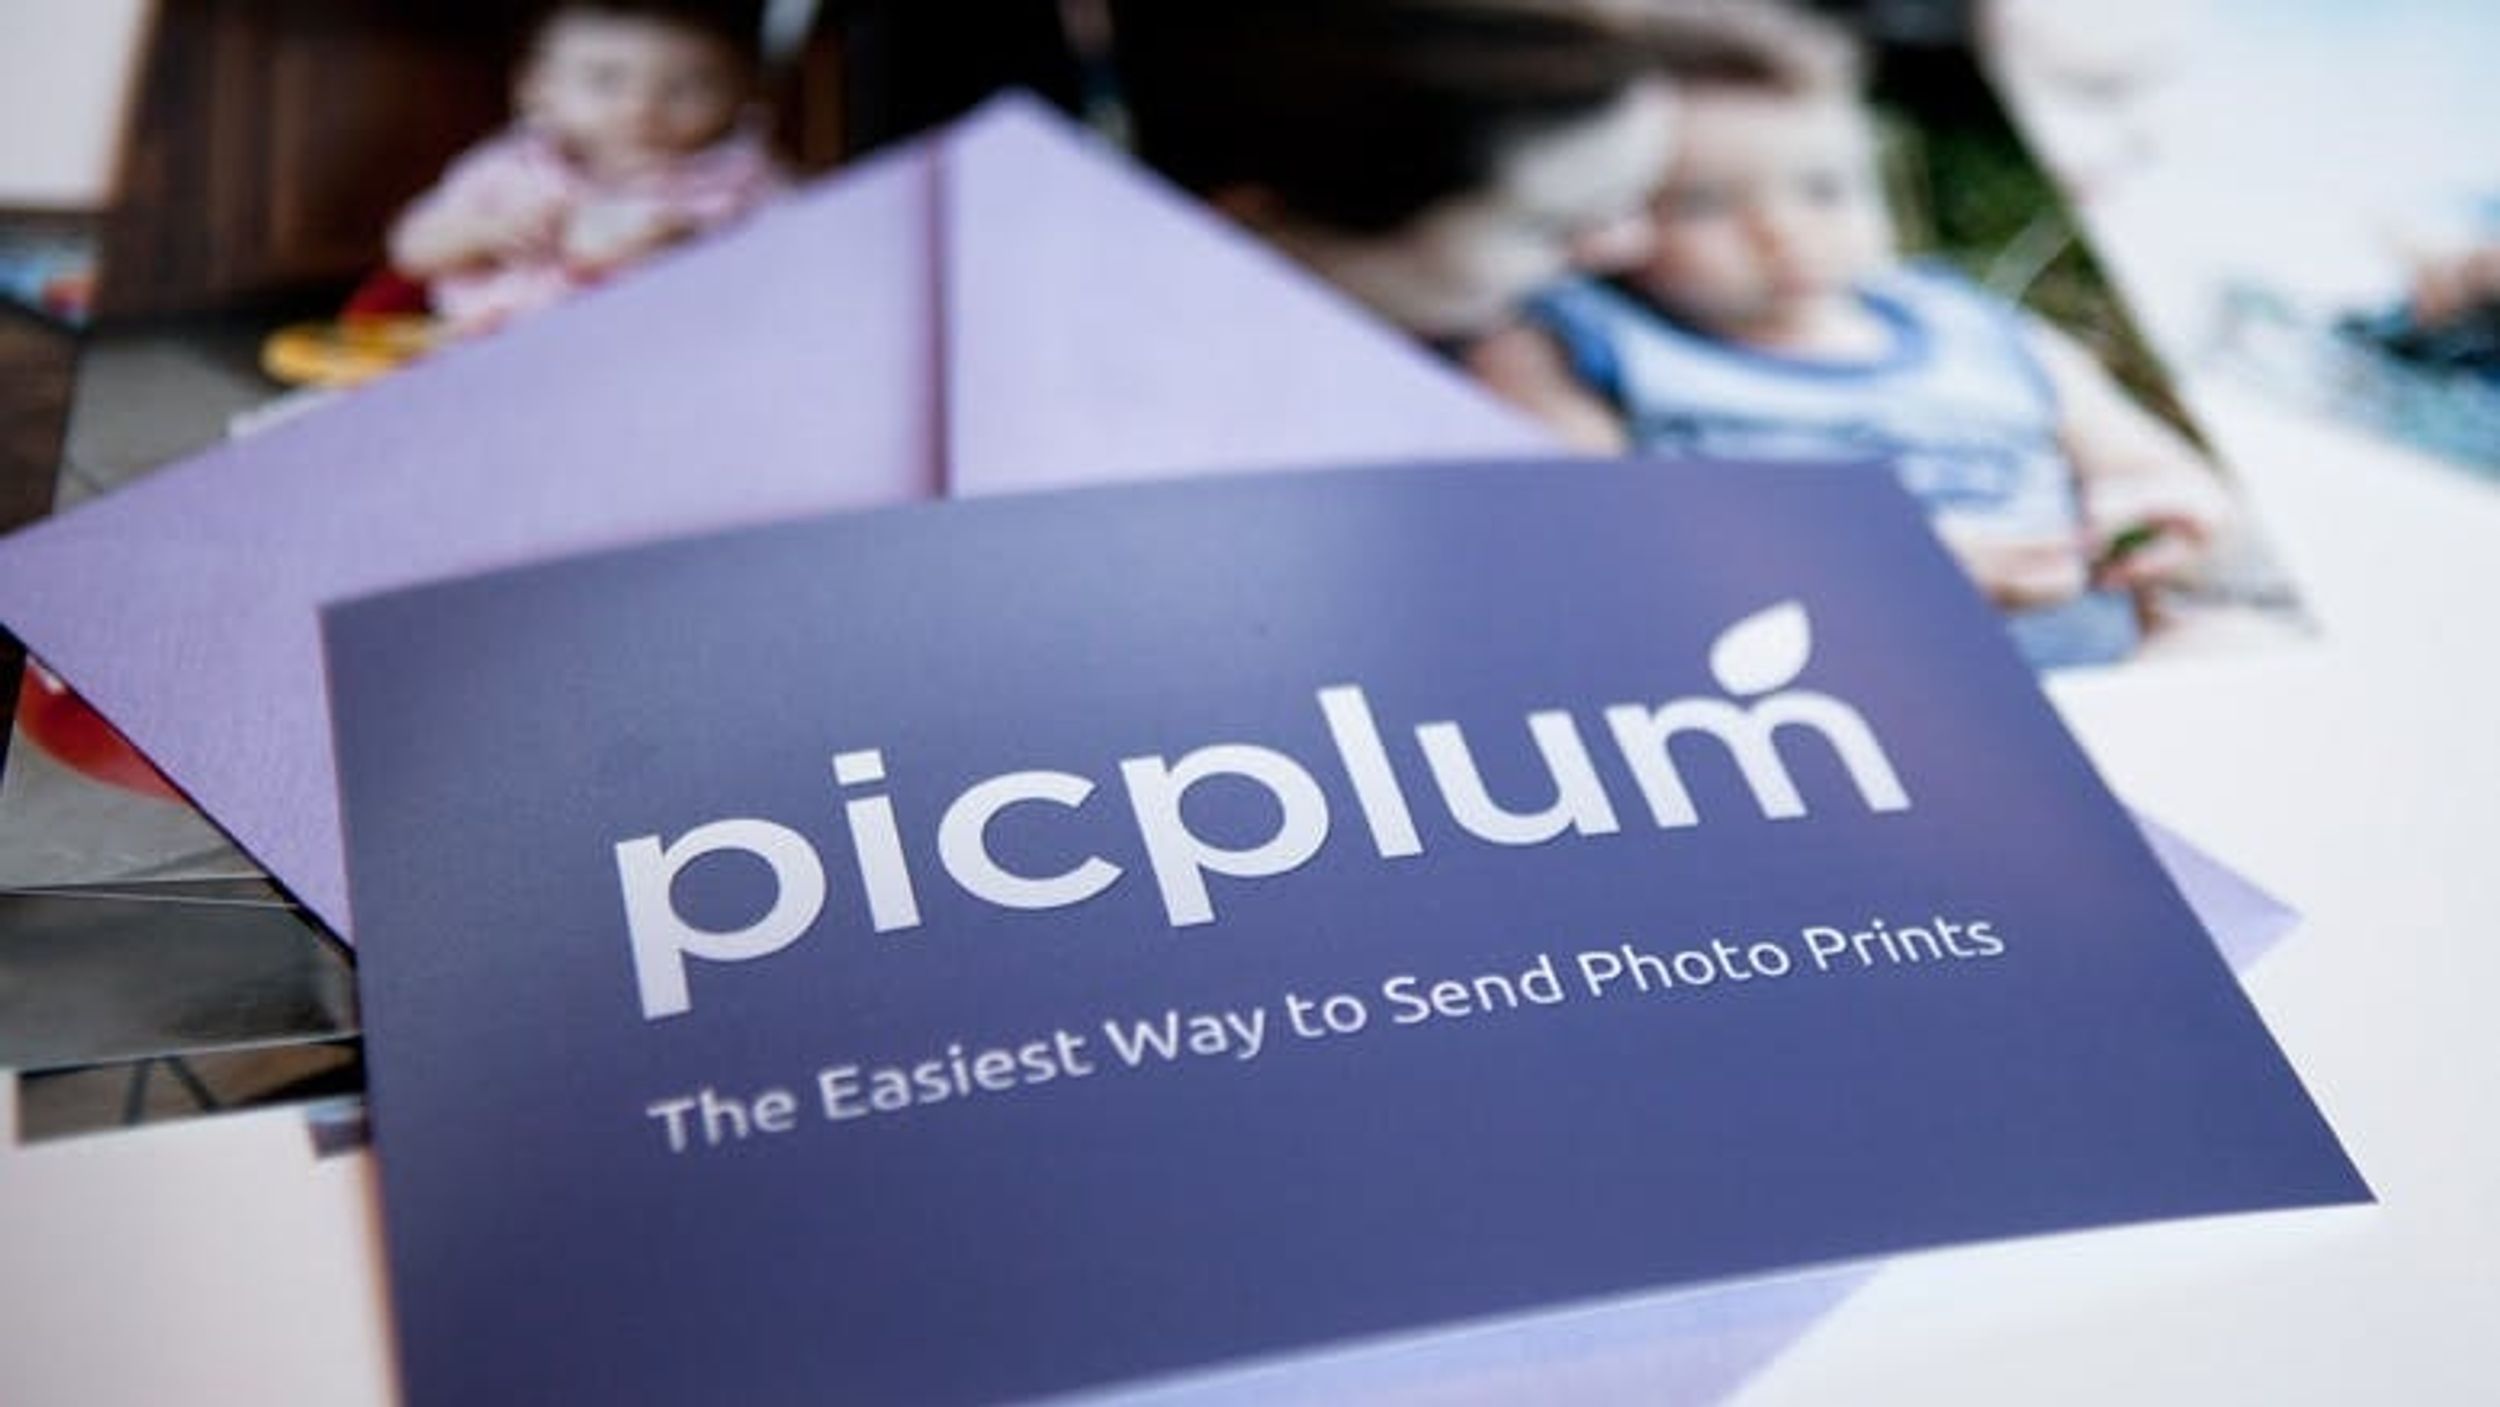 Friday Giveaway: Free Photo Prints From Picplum